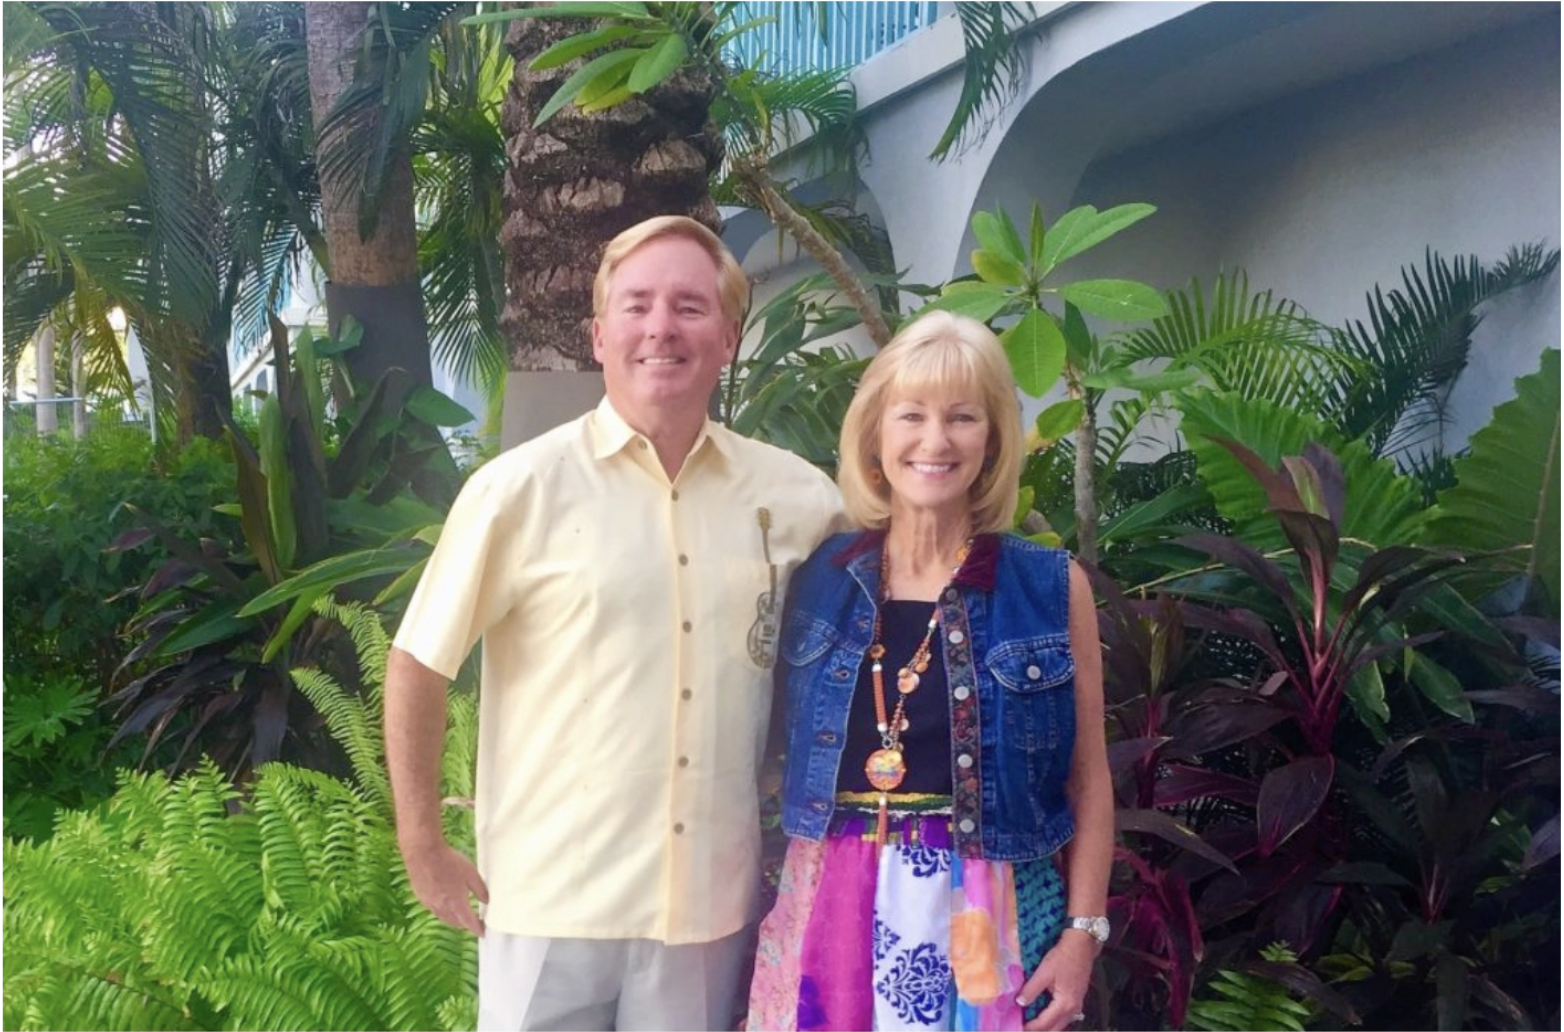 George and Tina Tripp. Ministry consultants in Saint Petersburg Florida.